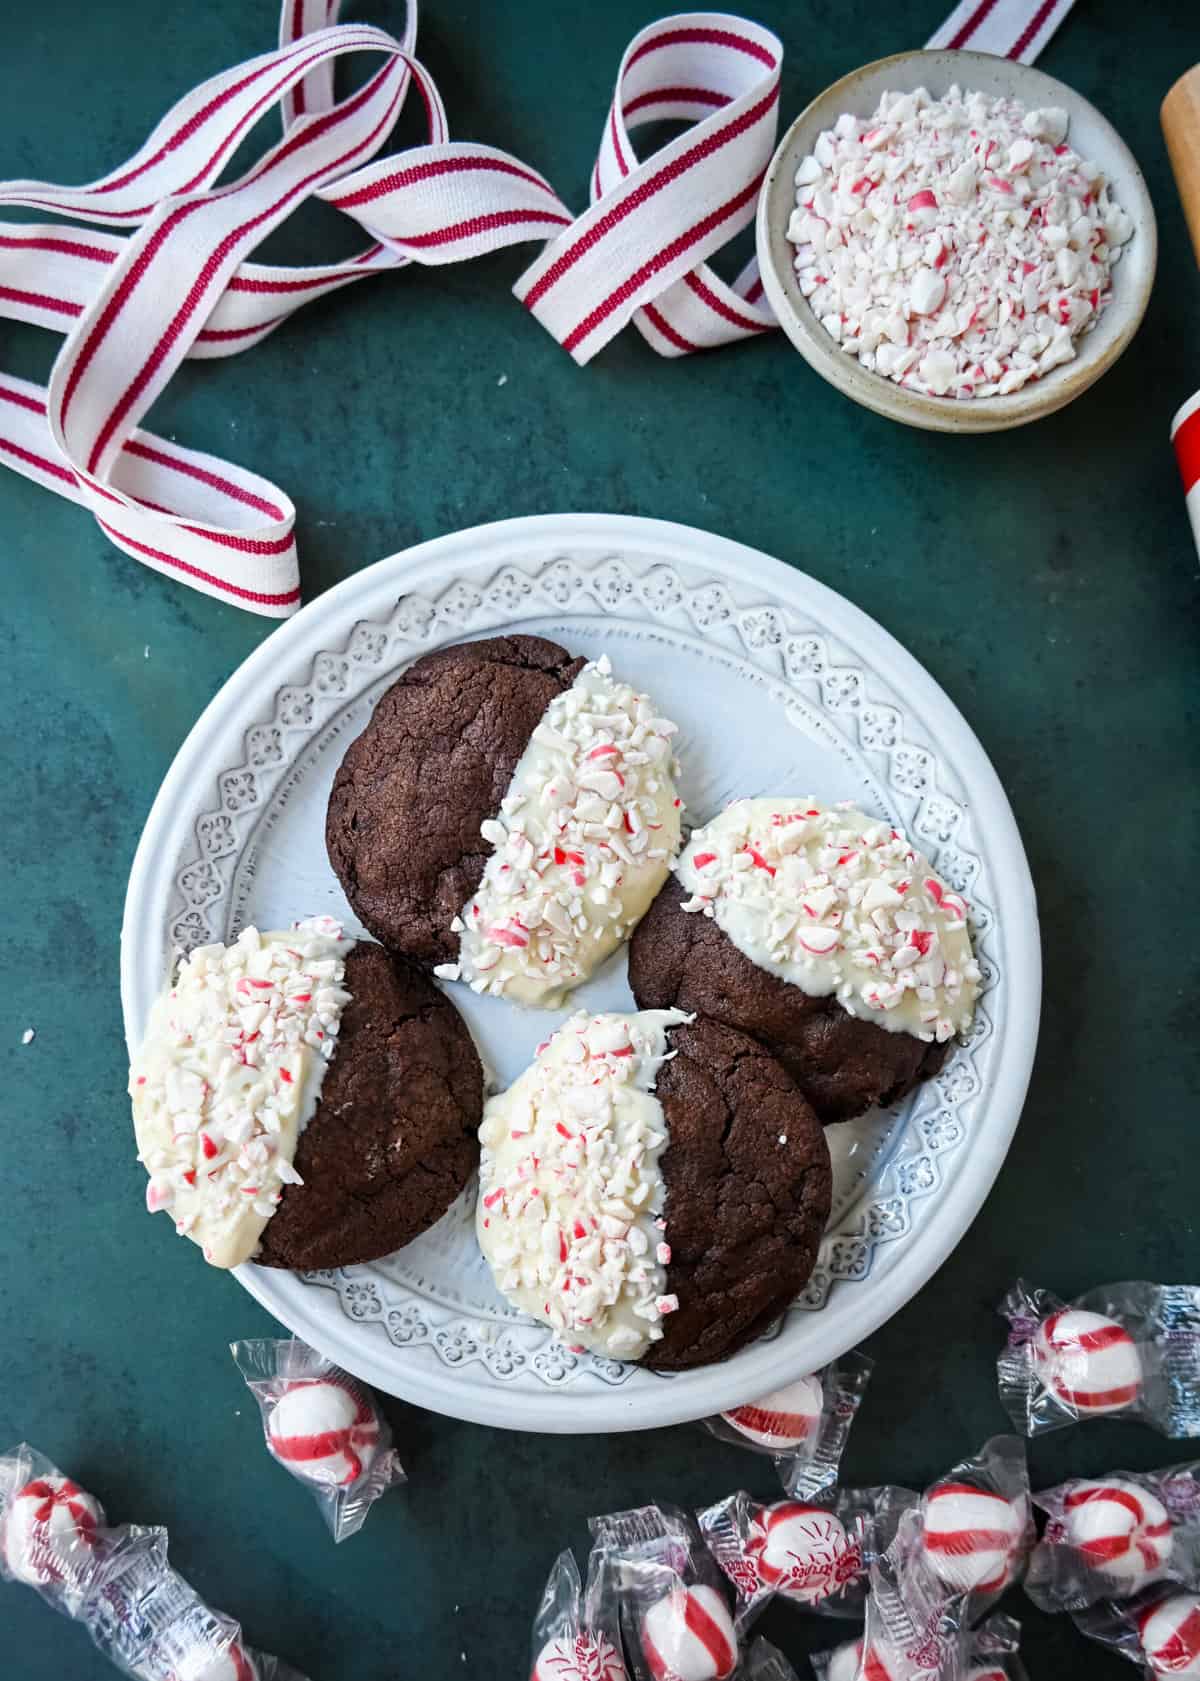 White Chocolate Dipped Peppermint Chocolate Cookies. The Double Chocolate Peppermint Cookies are soft baked, rich double chocolate brownie cookies dipped in white chocolate and covered with peppermint candy canes. The perfect Christmas holiday cookie recipe.